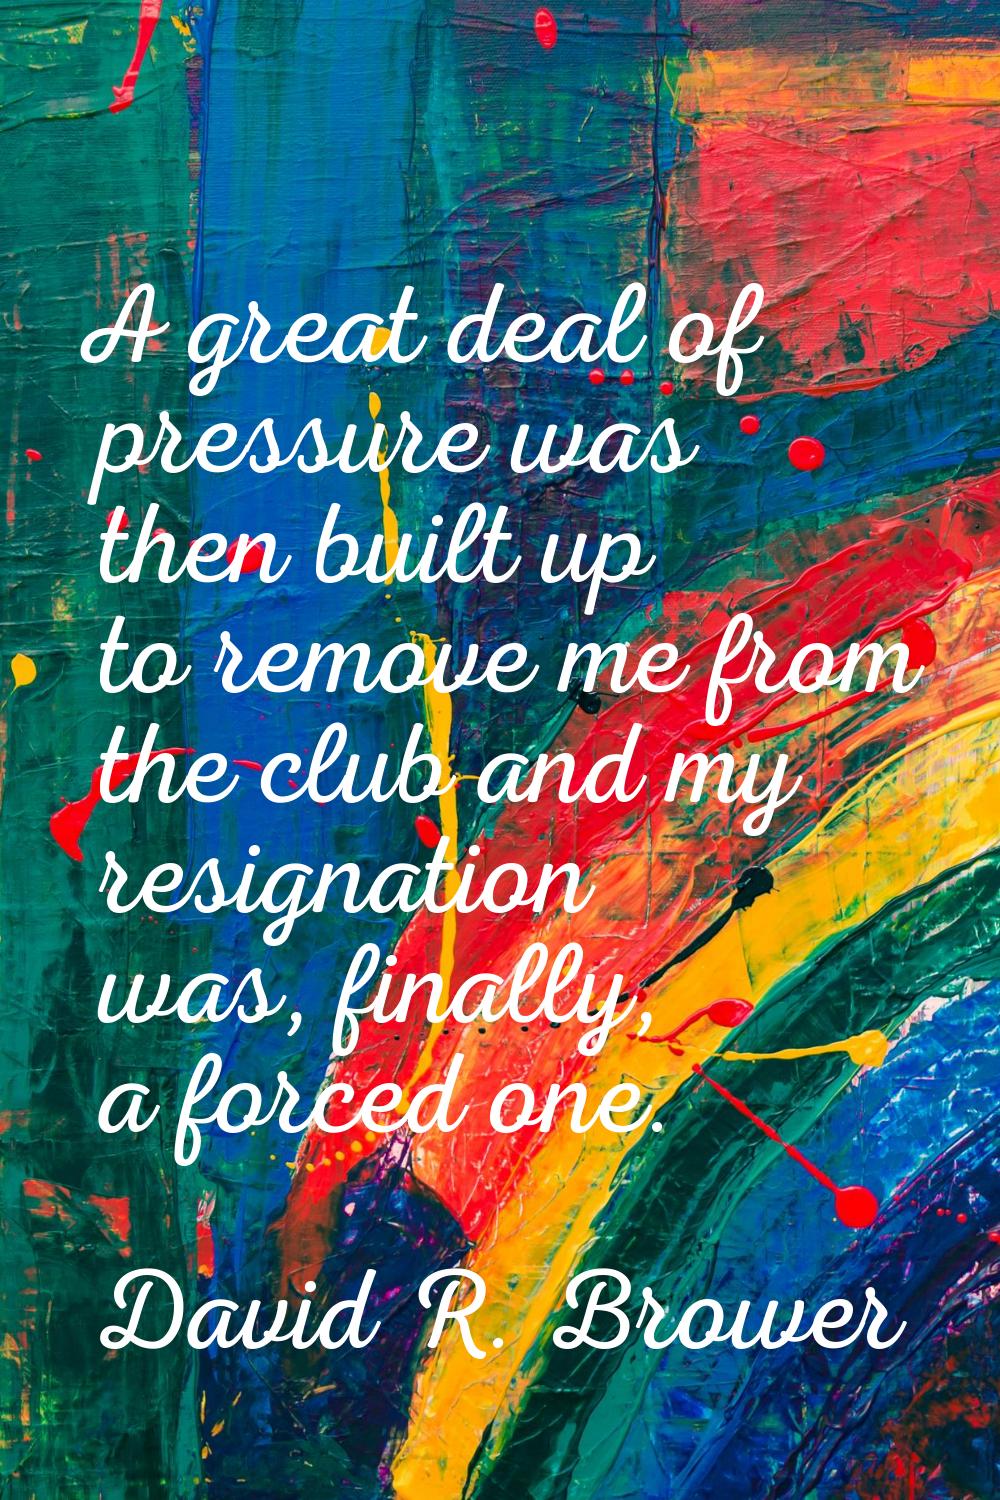 A great deal of pressure was then built up to remove me from the club and my resignation was, final